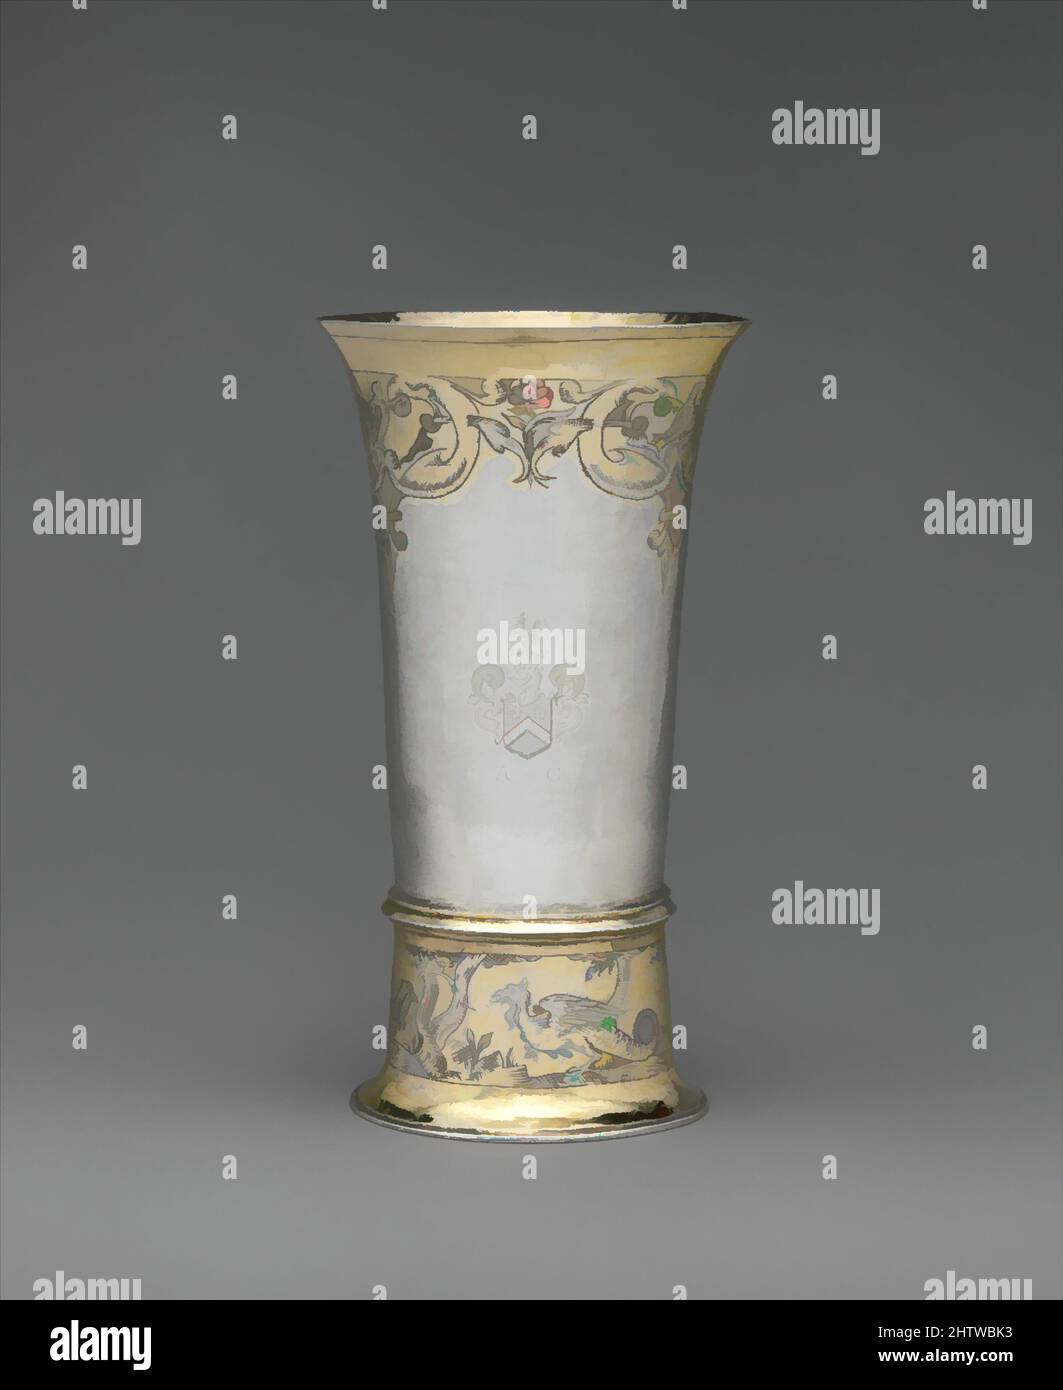 Art inspired by Footed beaker, first half 17th century, Hungarian, Brassó, Gilded silver, Overall: 5 3/16 x 2 7/8 in. (13.2 x 7.3 cm), Metalwork-Silver, Telling stories populated with mythological creatures—like those engraved on the base of this beaker—was a favorite pastime at social, Classic works modernized by Artotop with a splash of modernity. Shapes, color and value, eye-catching visual impact on art. Emotions through freedom of artworks in a contemporary way. A timeless message pursuing a wildly creative new direction. Artists turning to the digital medium and creating the Artotop NFT Stock Photo